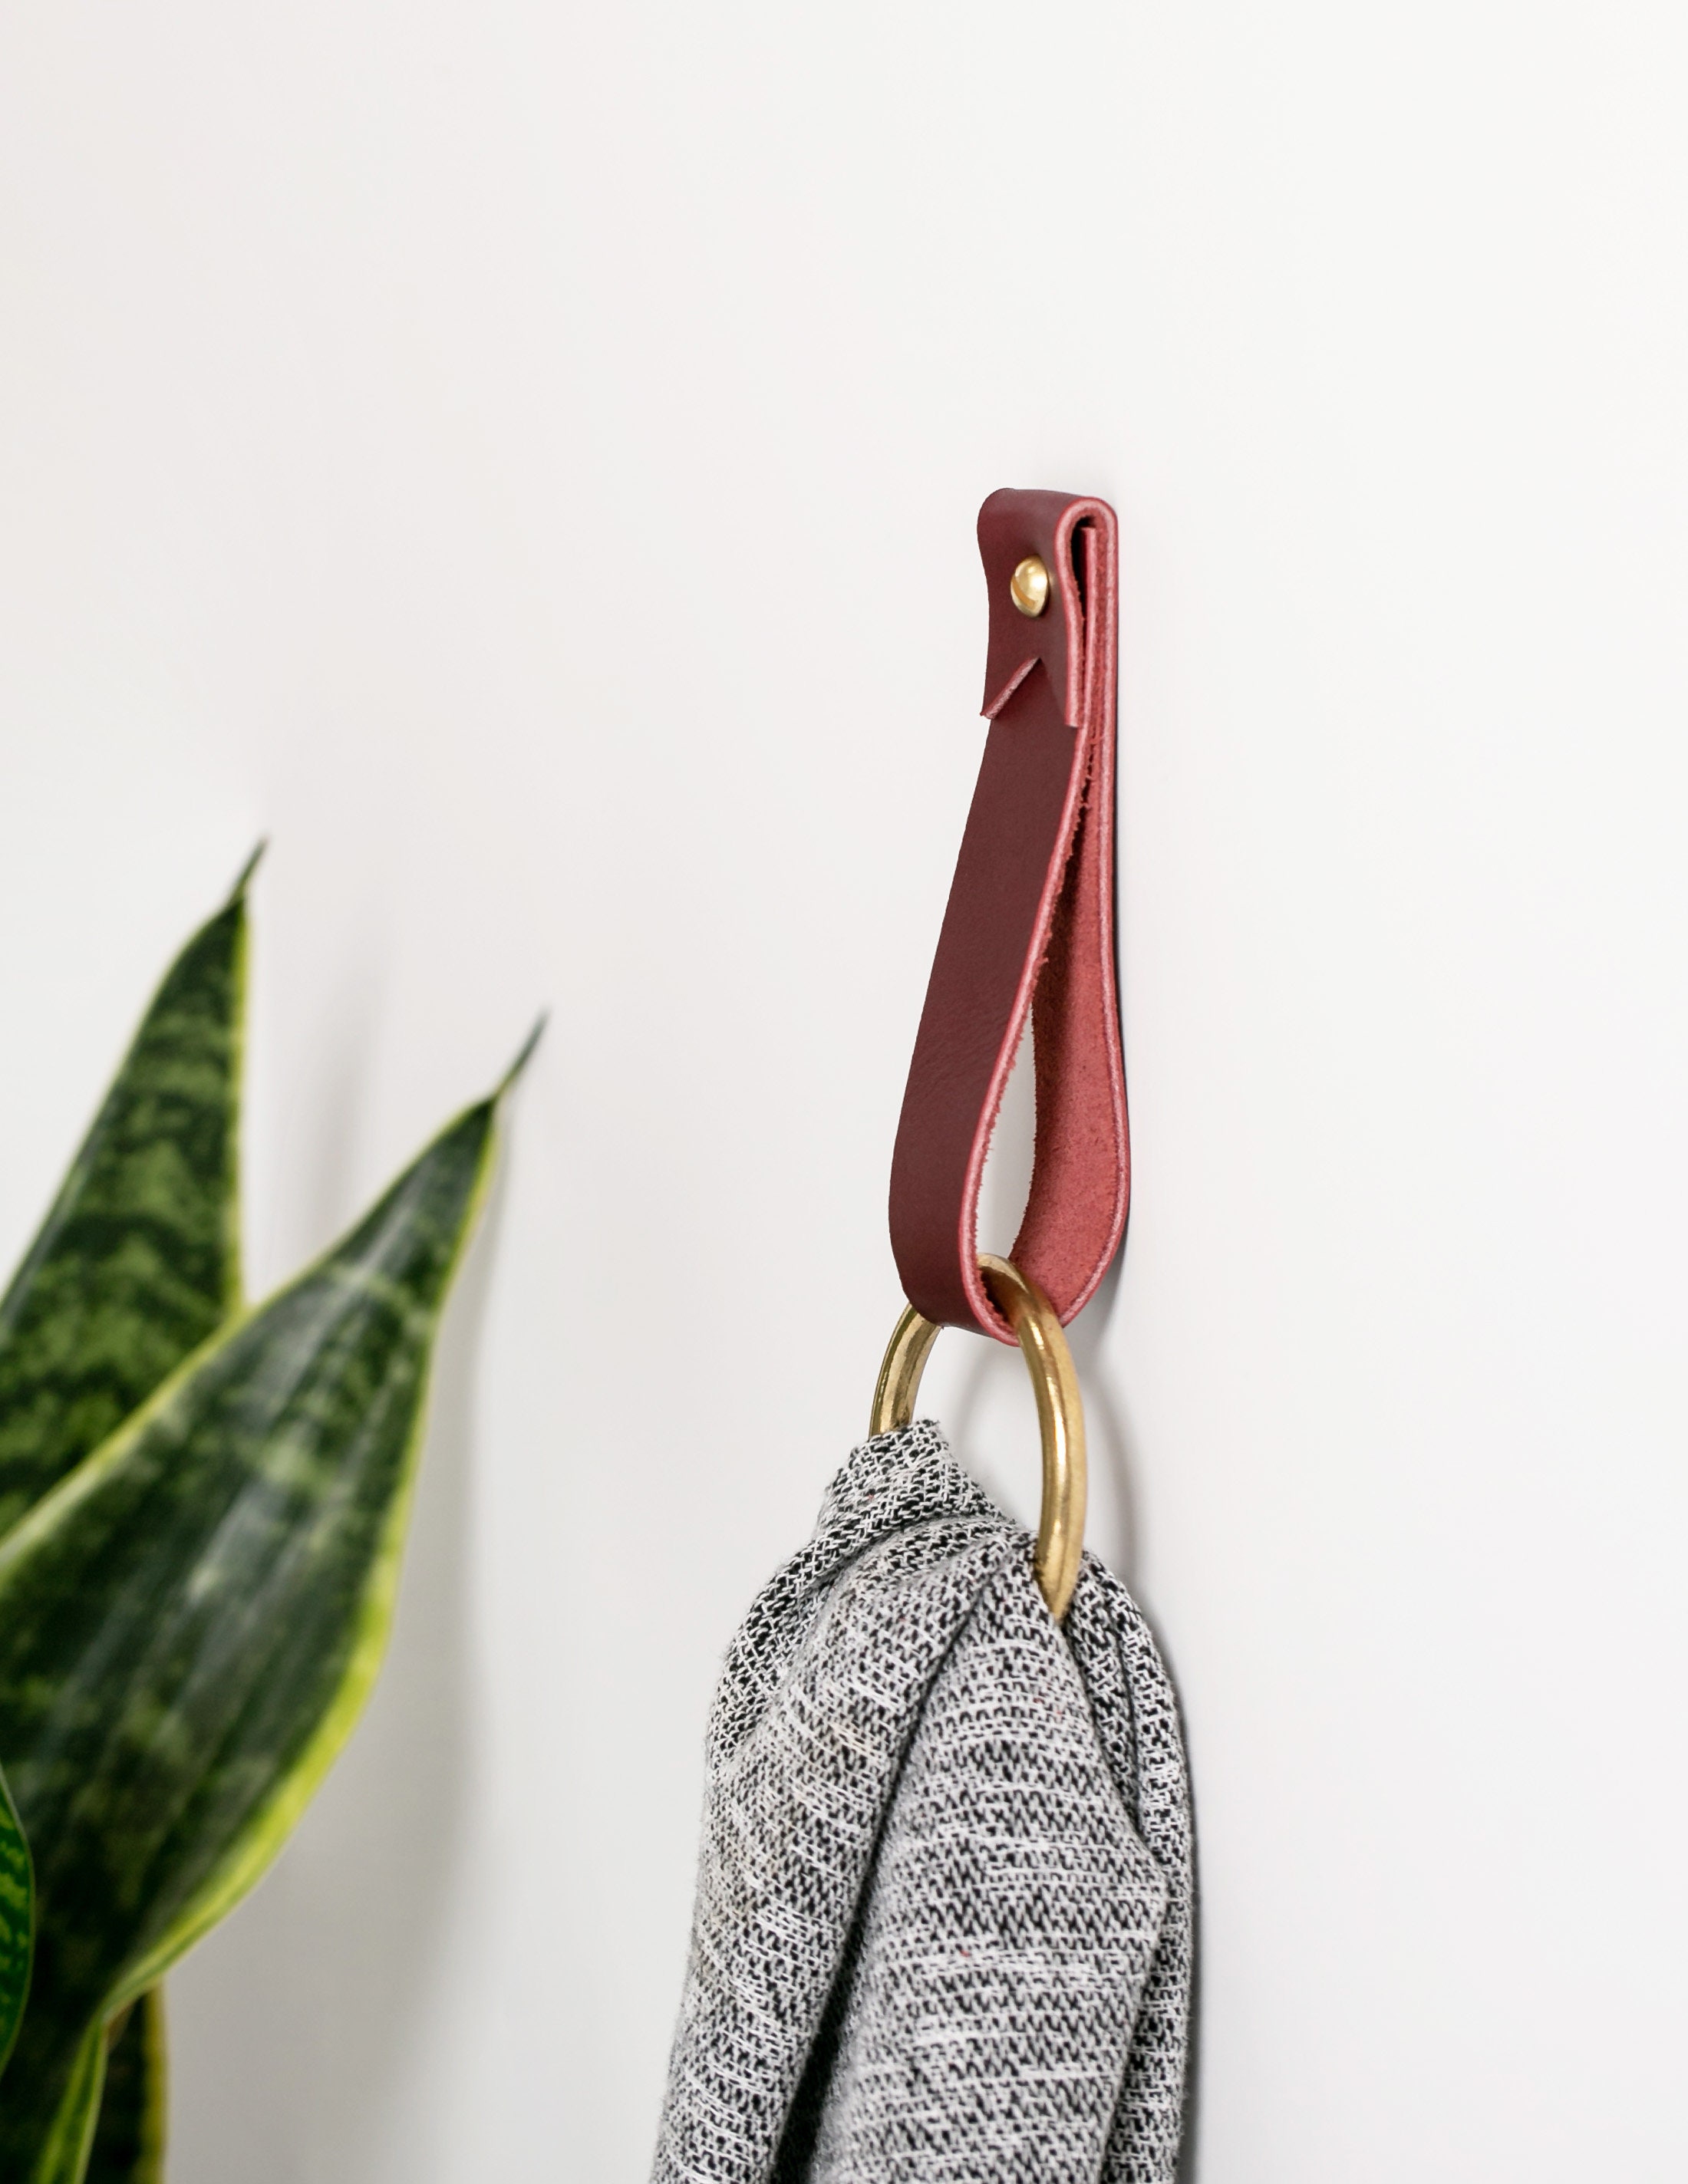 Leather Wall Hanging Strap Wall Hook Hanging Storage Home Decor